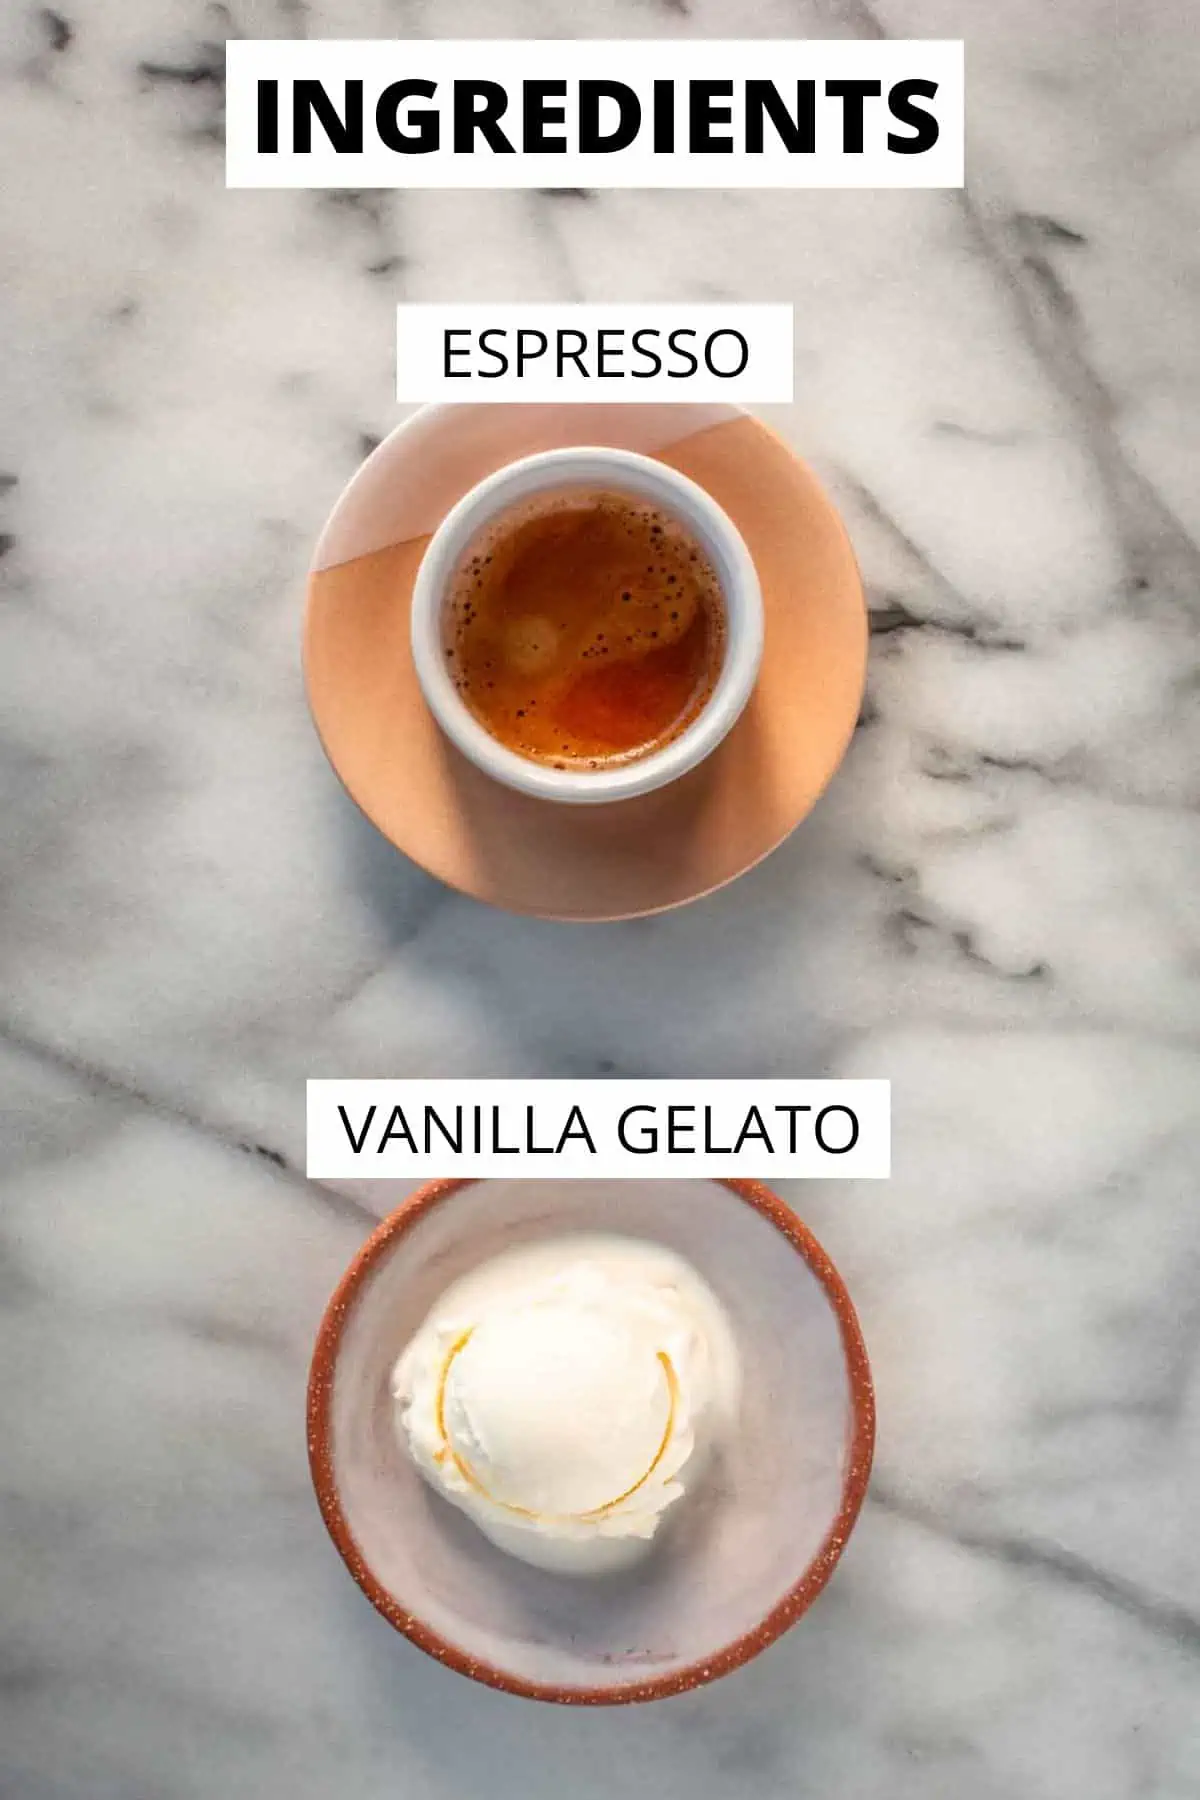 Labeled ingredient graphic for making an affogato, featuring espresso and vanilla gelato.